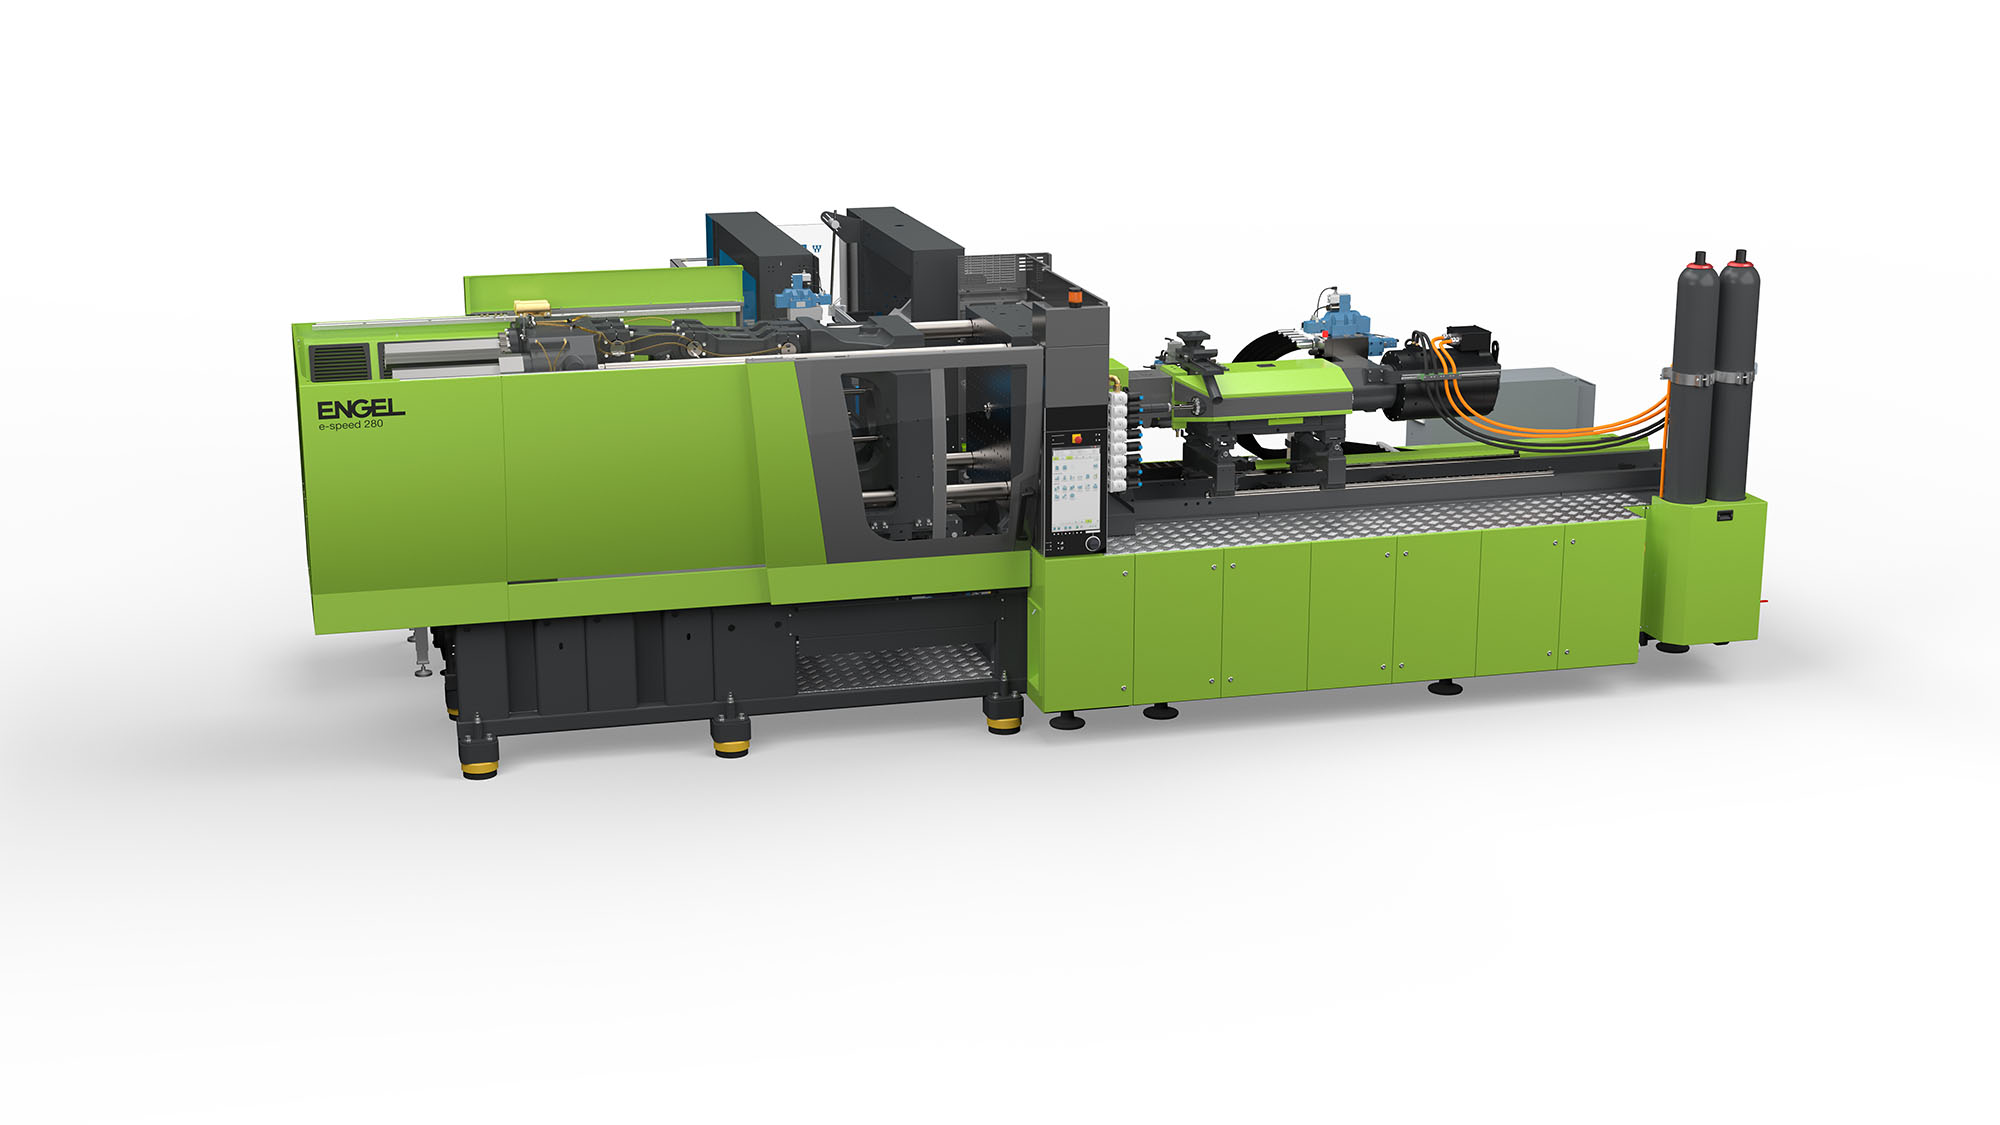 Engel’s hybrid e-speed 280/50 injection machine is used to demonstrate benefits of the process technology.  